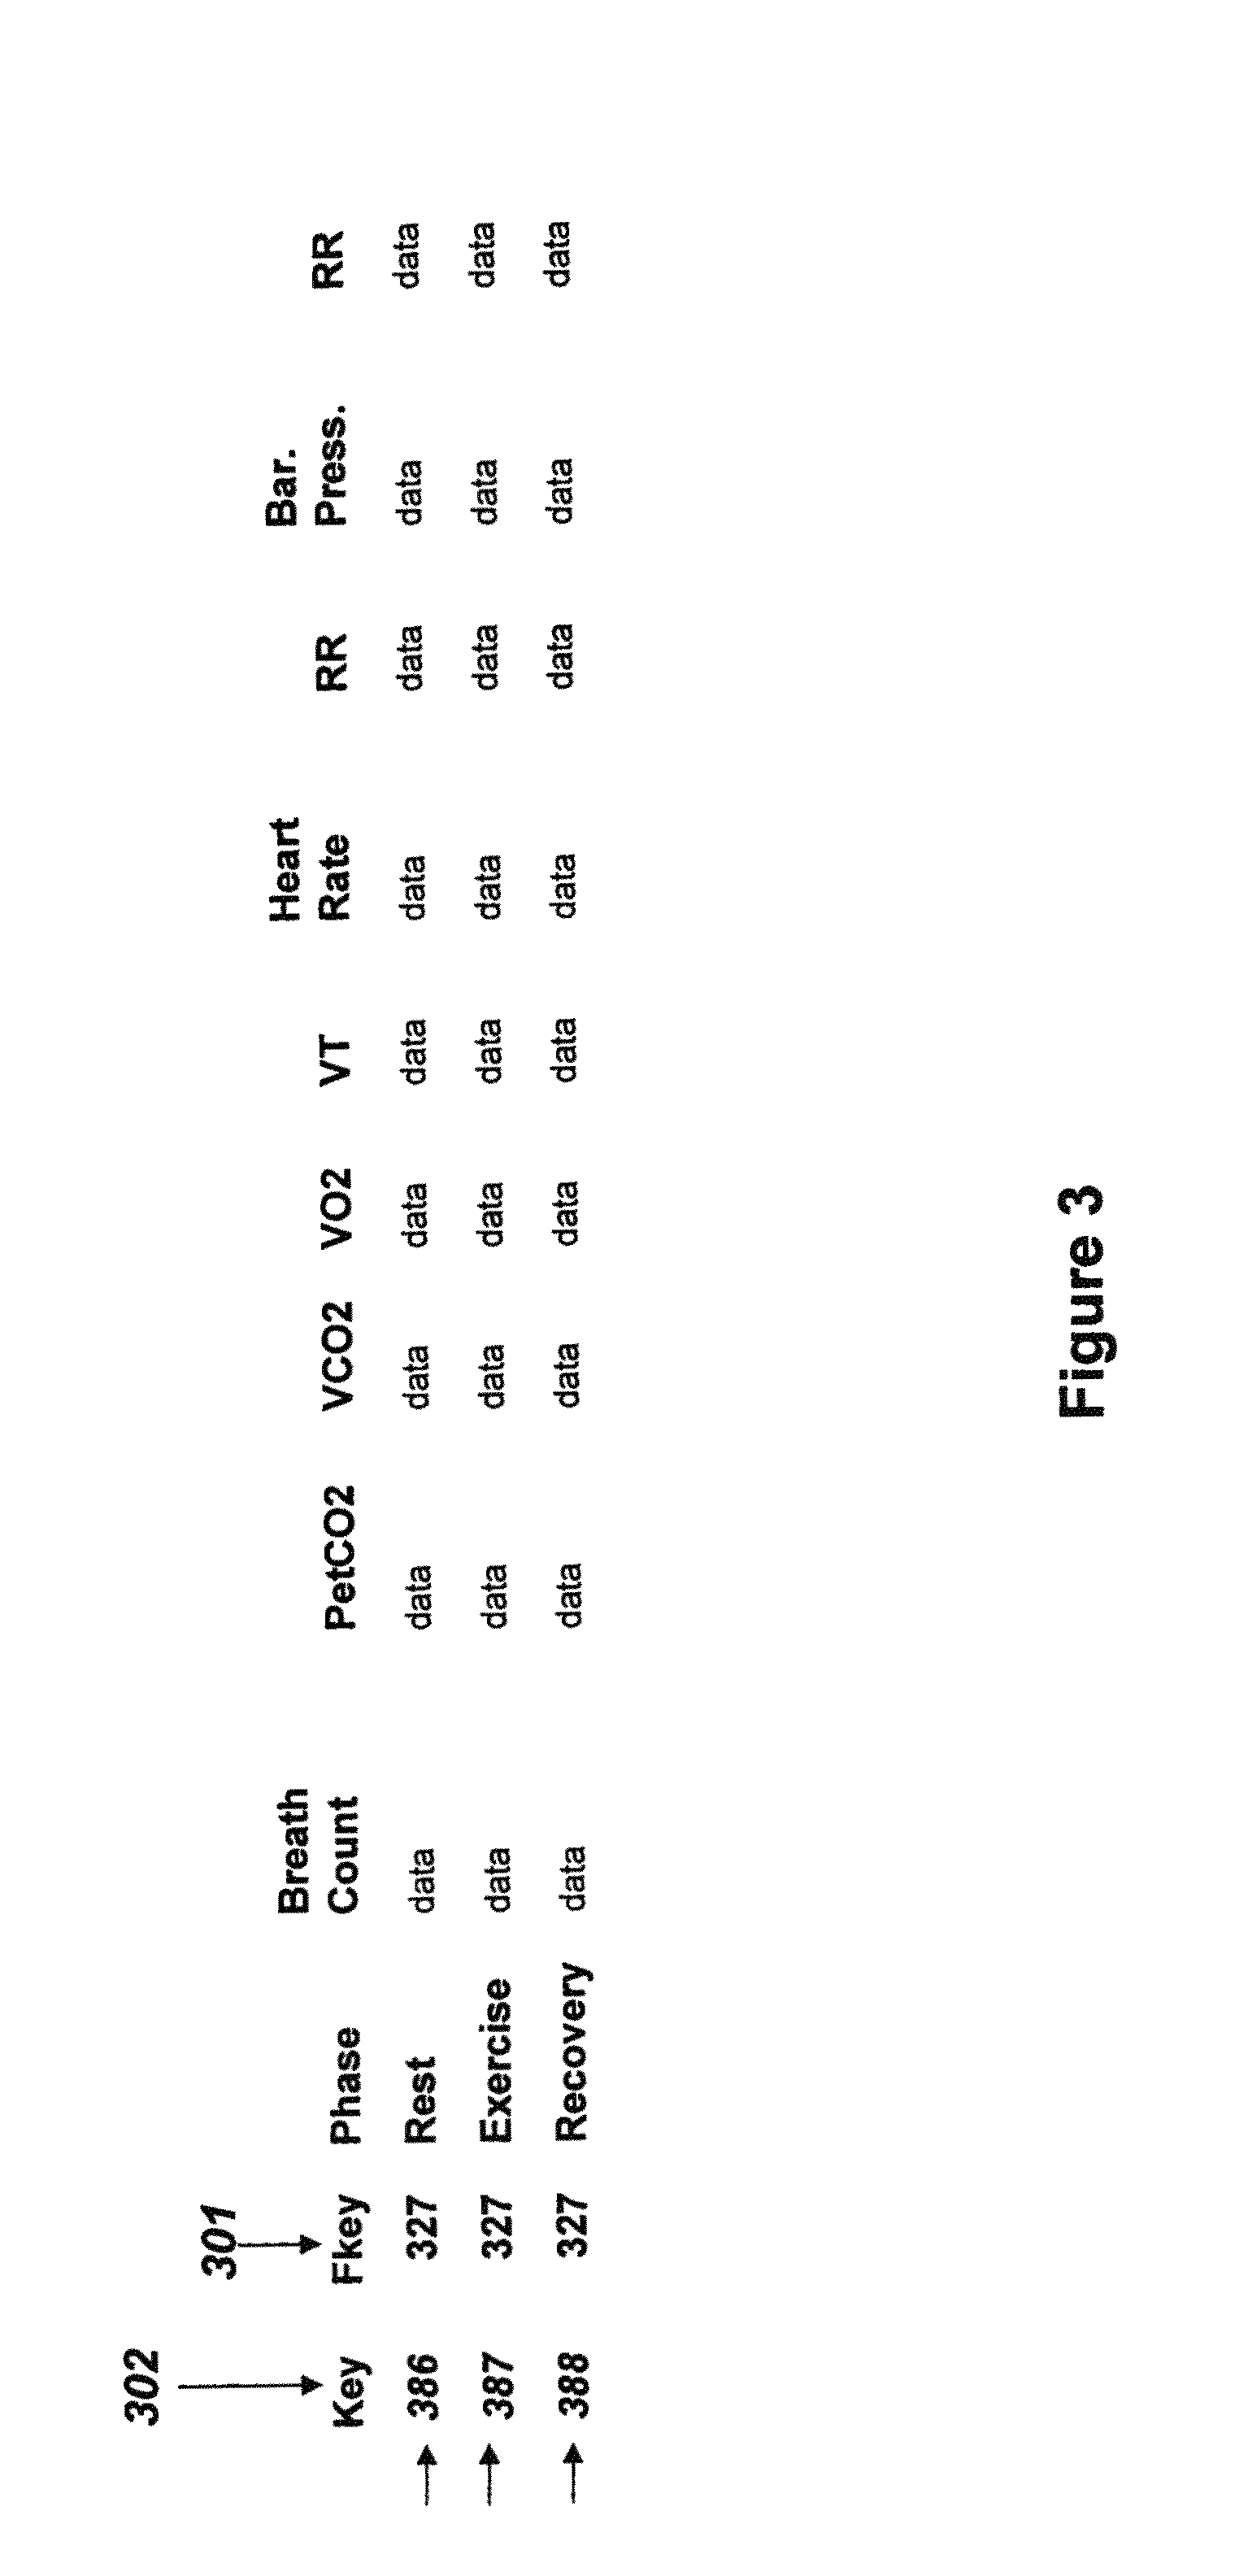 Pattern recognition system for classifying the functional status of patients with pulmonary hypertension, including pulmonary arterial and pulmonary vascular hypertension